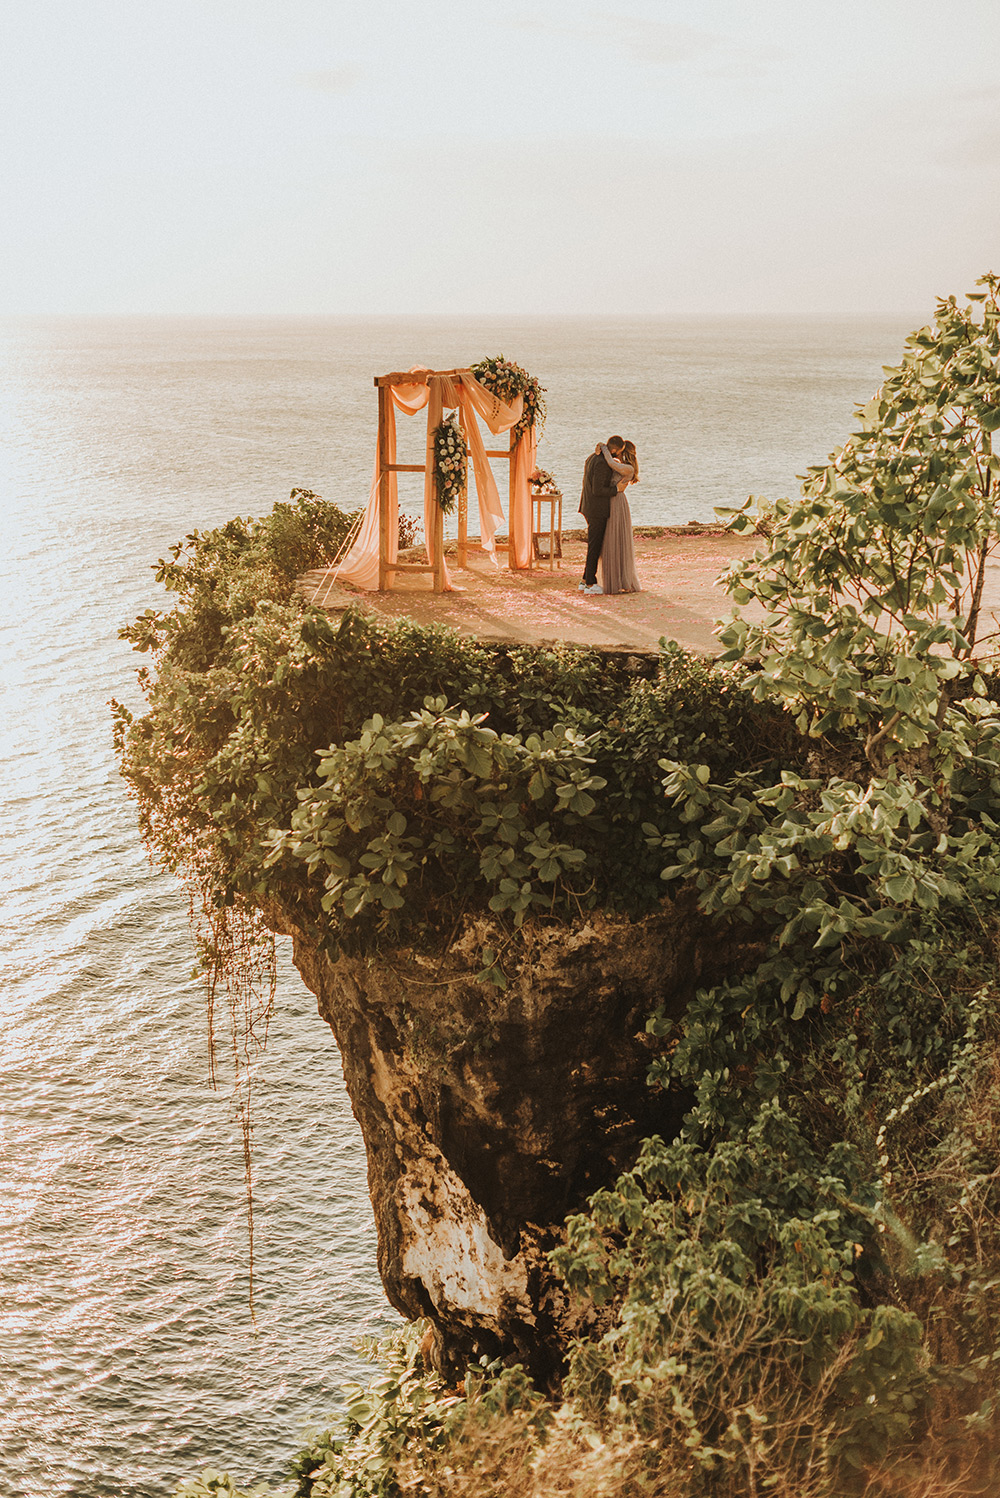 5 amazing Bali elopements + tips to plan your own